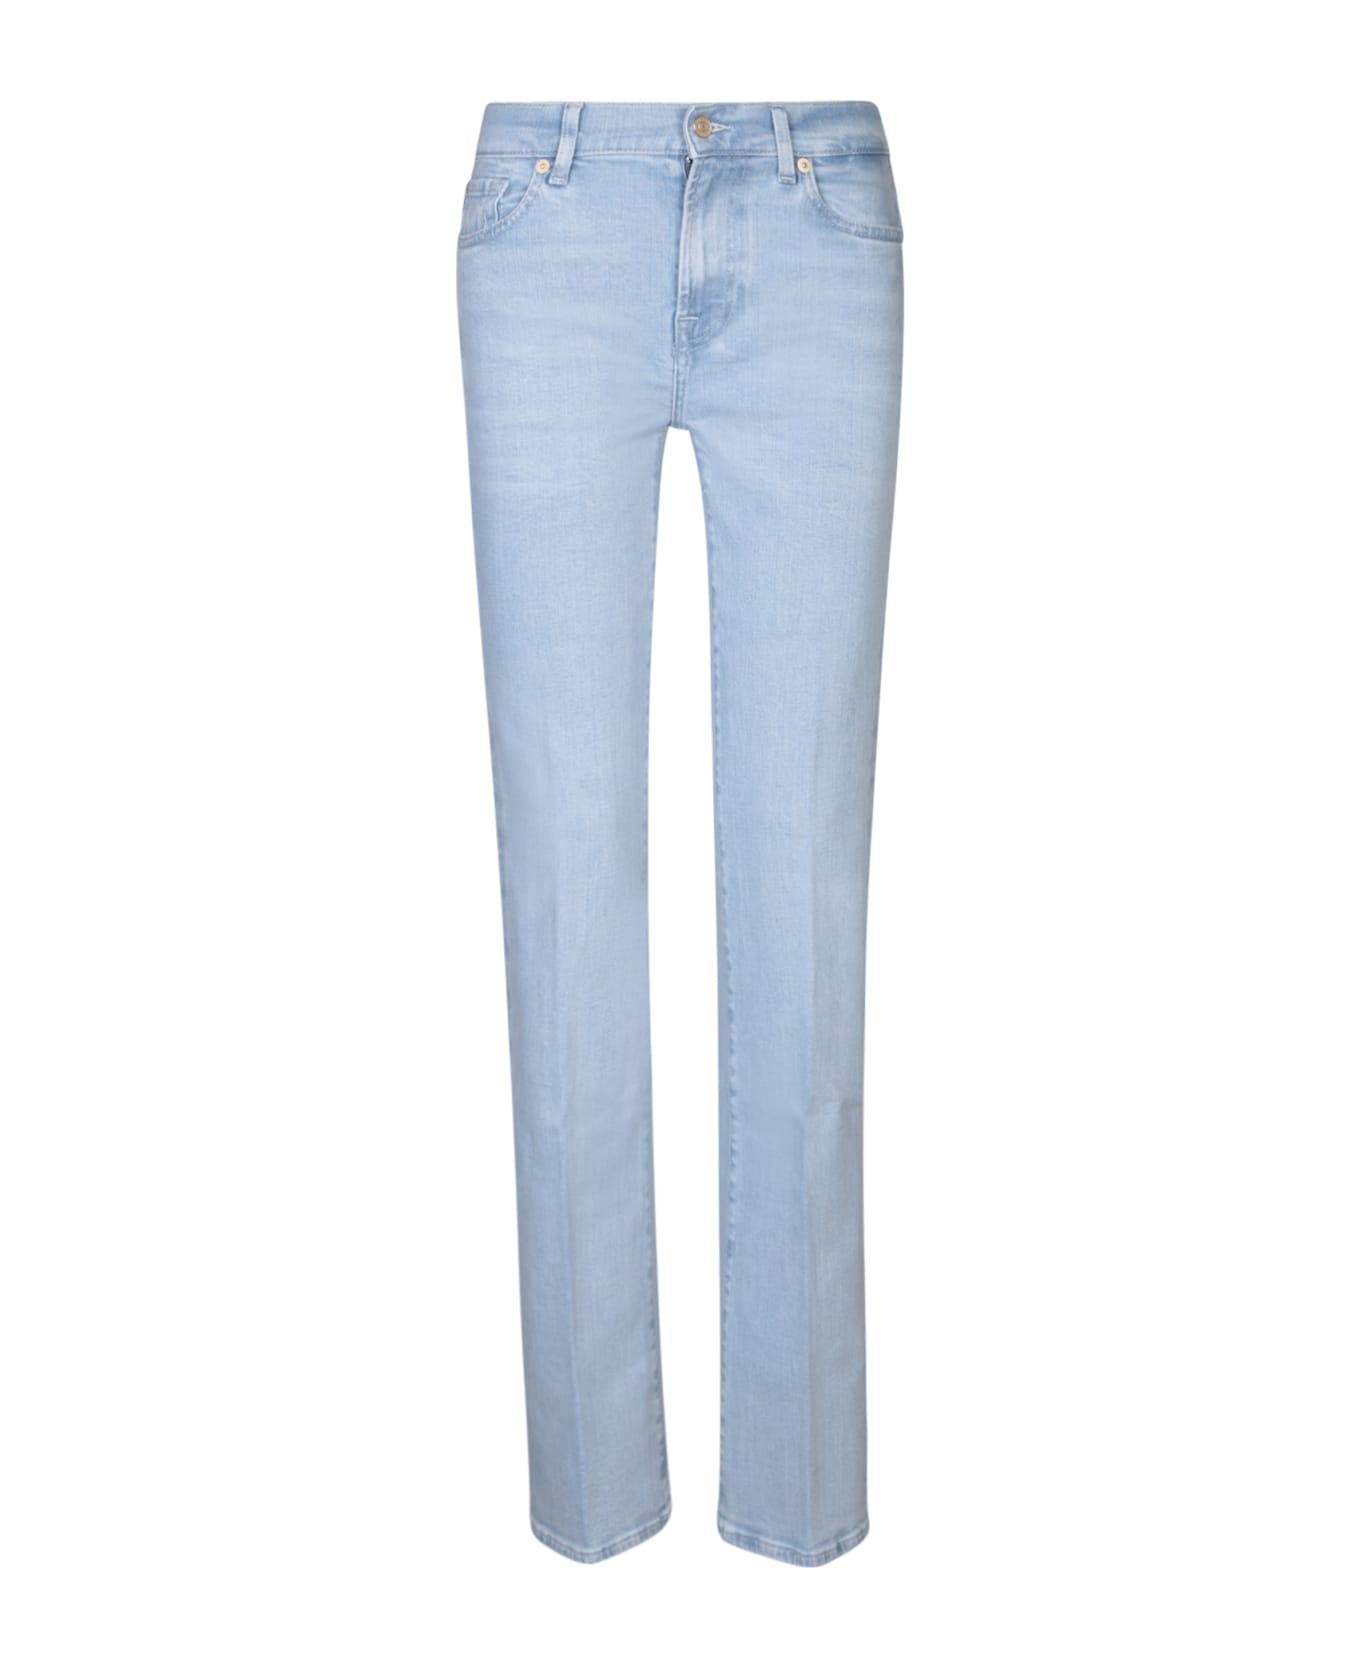 7 For All Mankind Bootcut Light Blue Jeans - Blue デニム